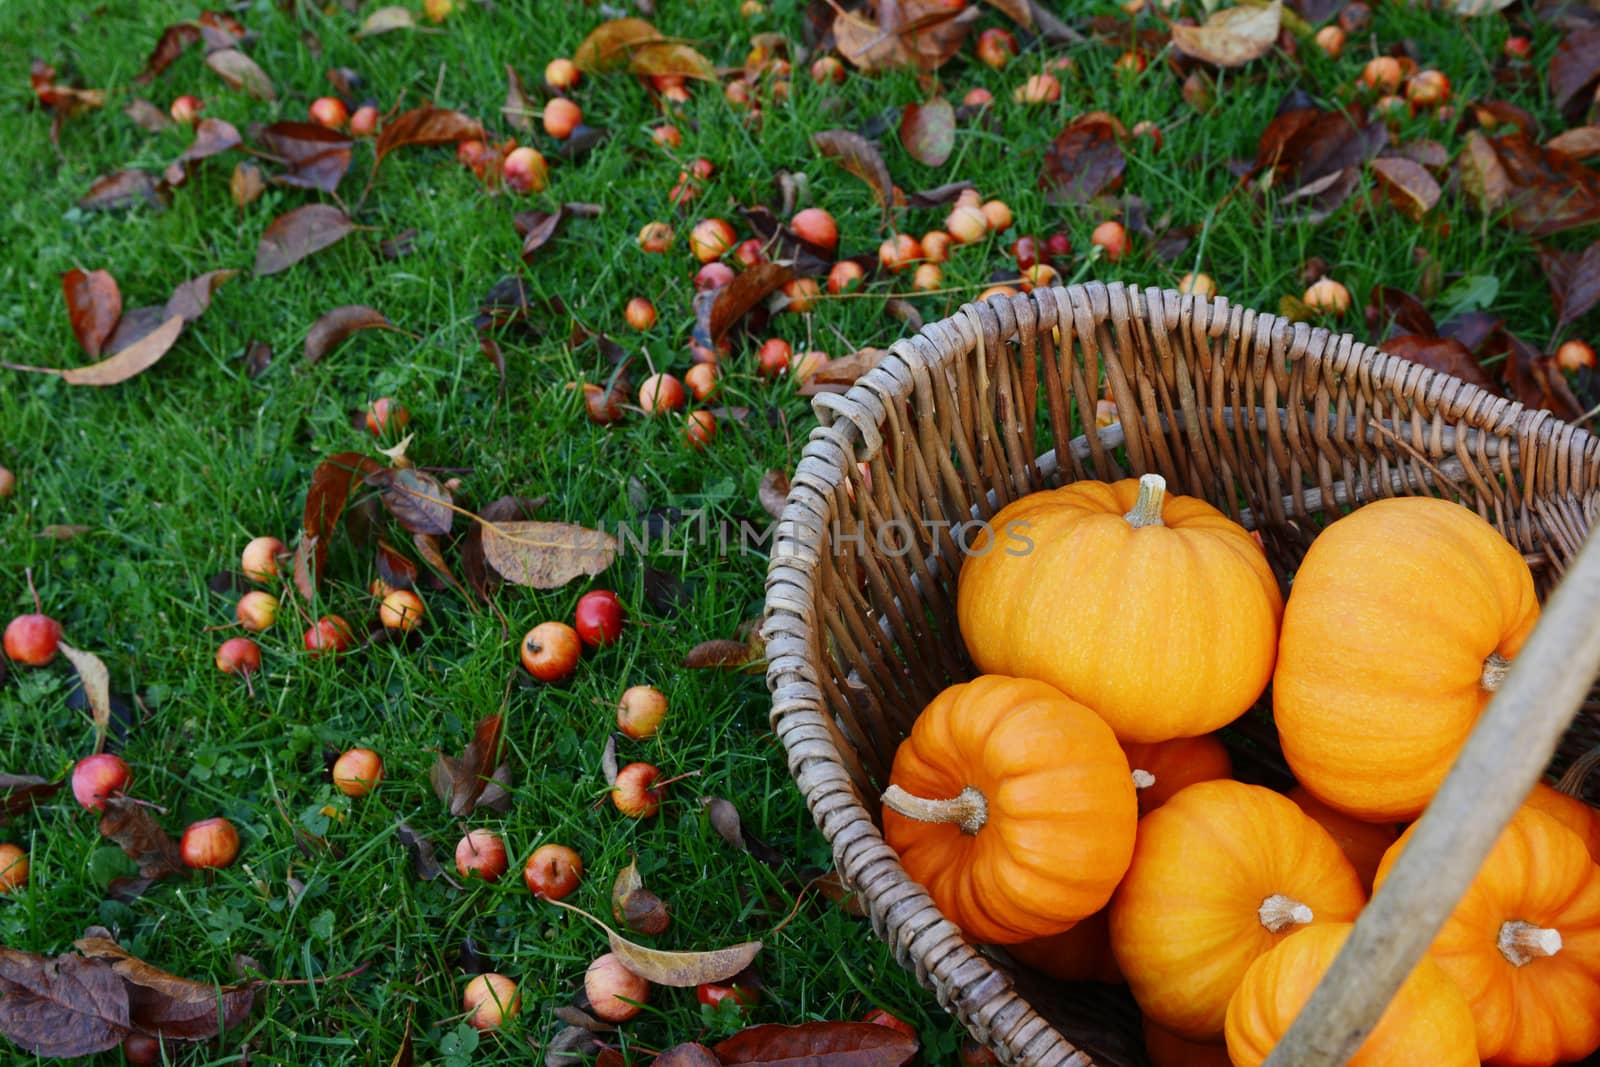 Rustic basket of mini orange pumpkins for Thanksgiving decorations on a lawn covered with fallen crab apples and autumn leaves